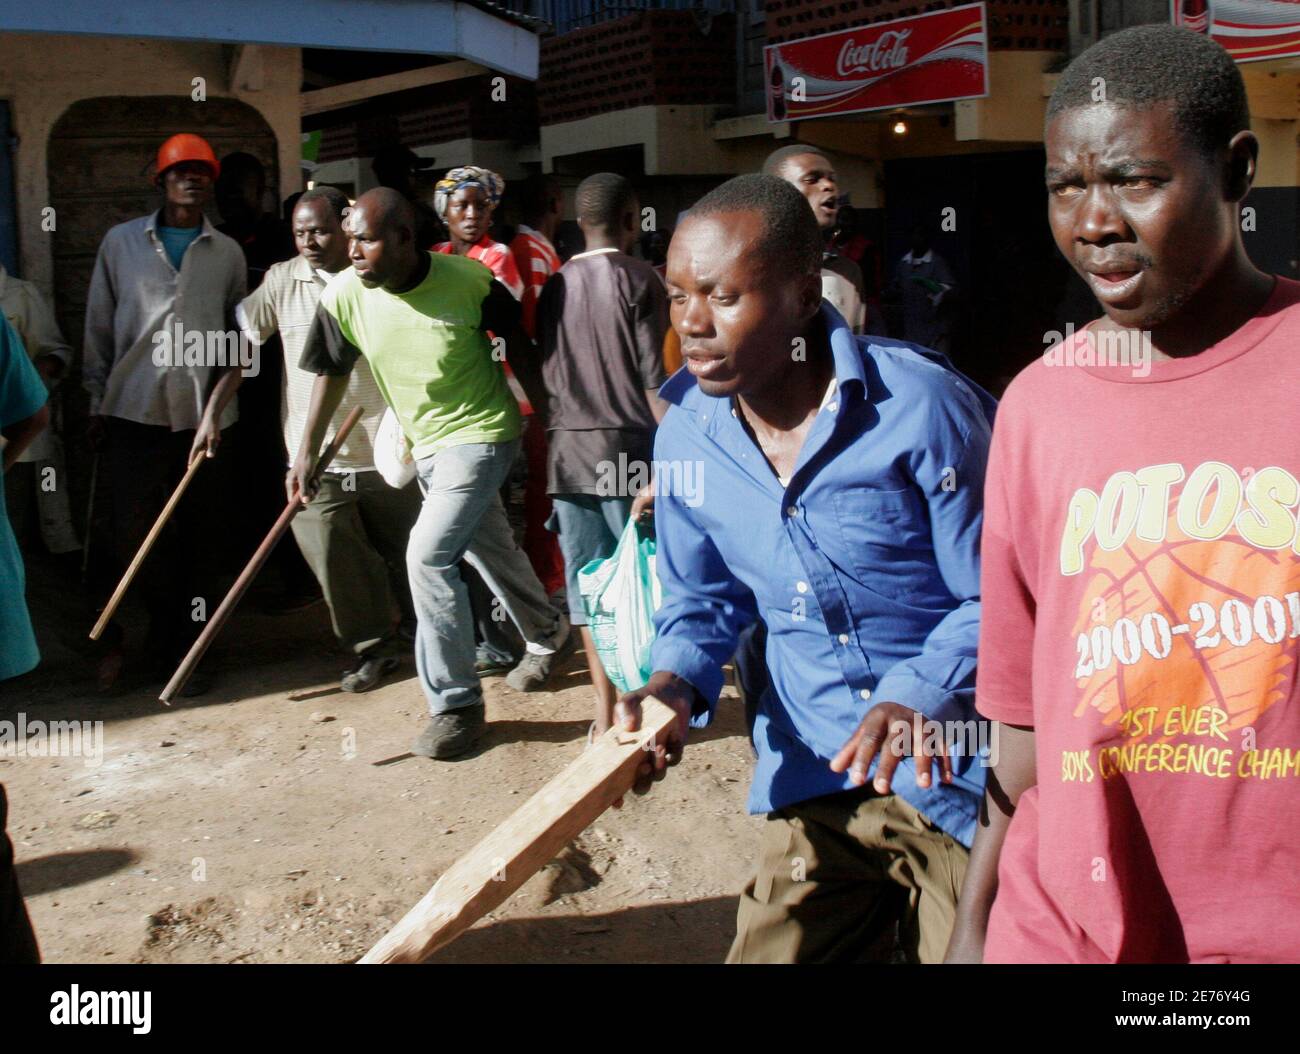 Opposition supporters run armed with sticks during ethnic violence in Nairobi January 2, 2008. President Mwai Kibaki's government accused rival Raila Odinga's party of unleashing 'genocide' in Kenya on Wednesday as the death toll from tribal violence over a disputed election passed 300. REUTERS/Thomas Mukoya   (KENYA) Stock Photo